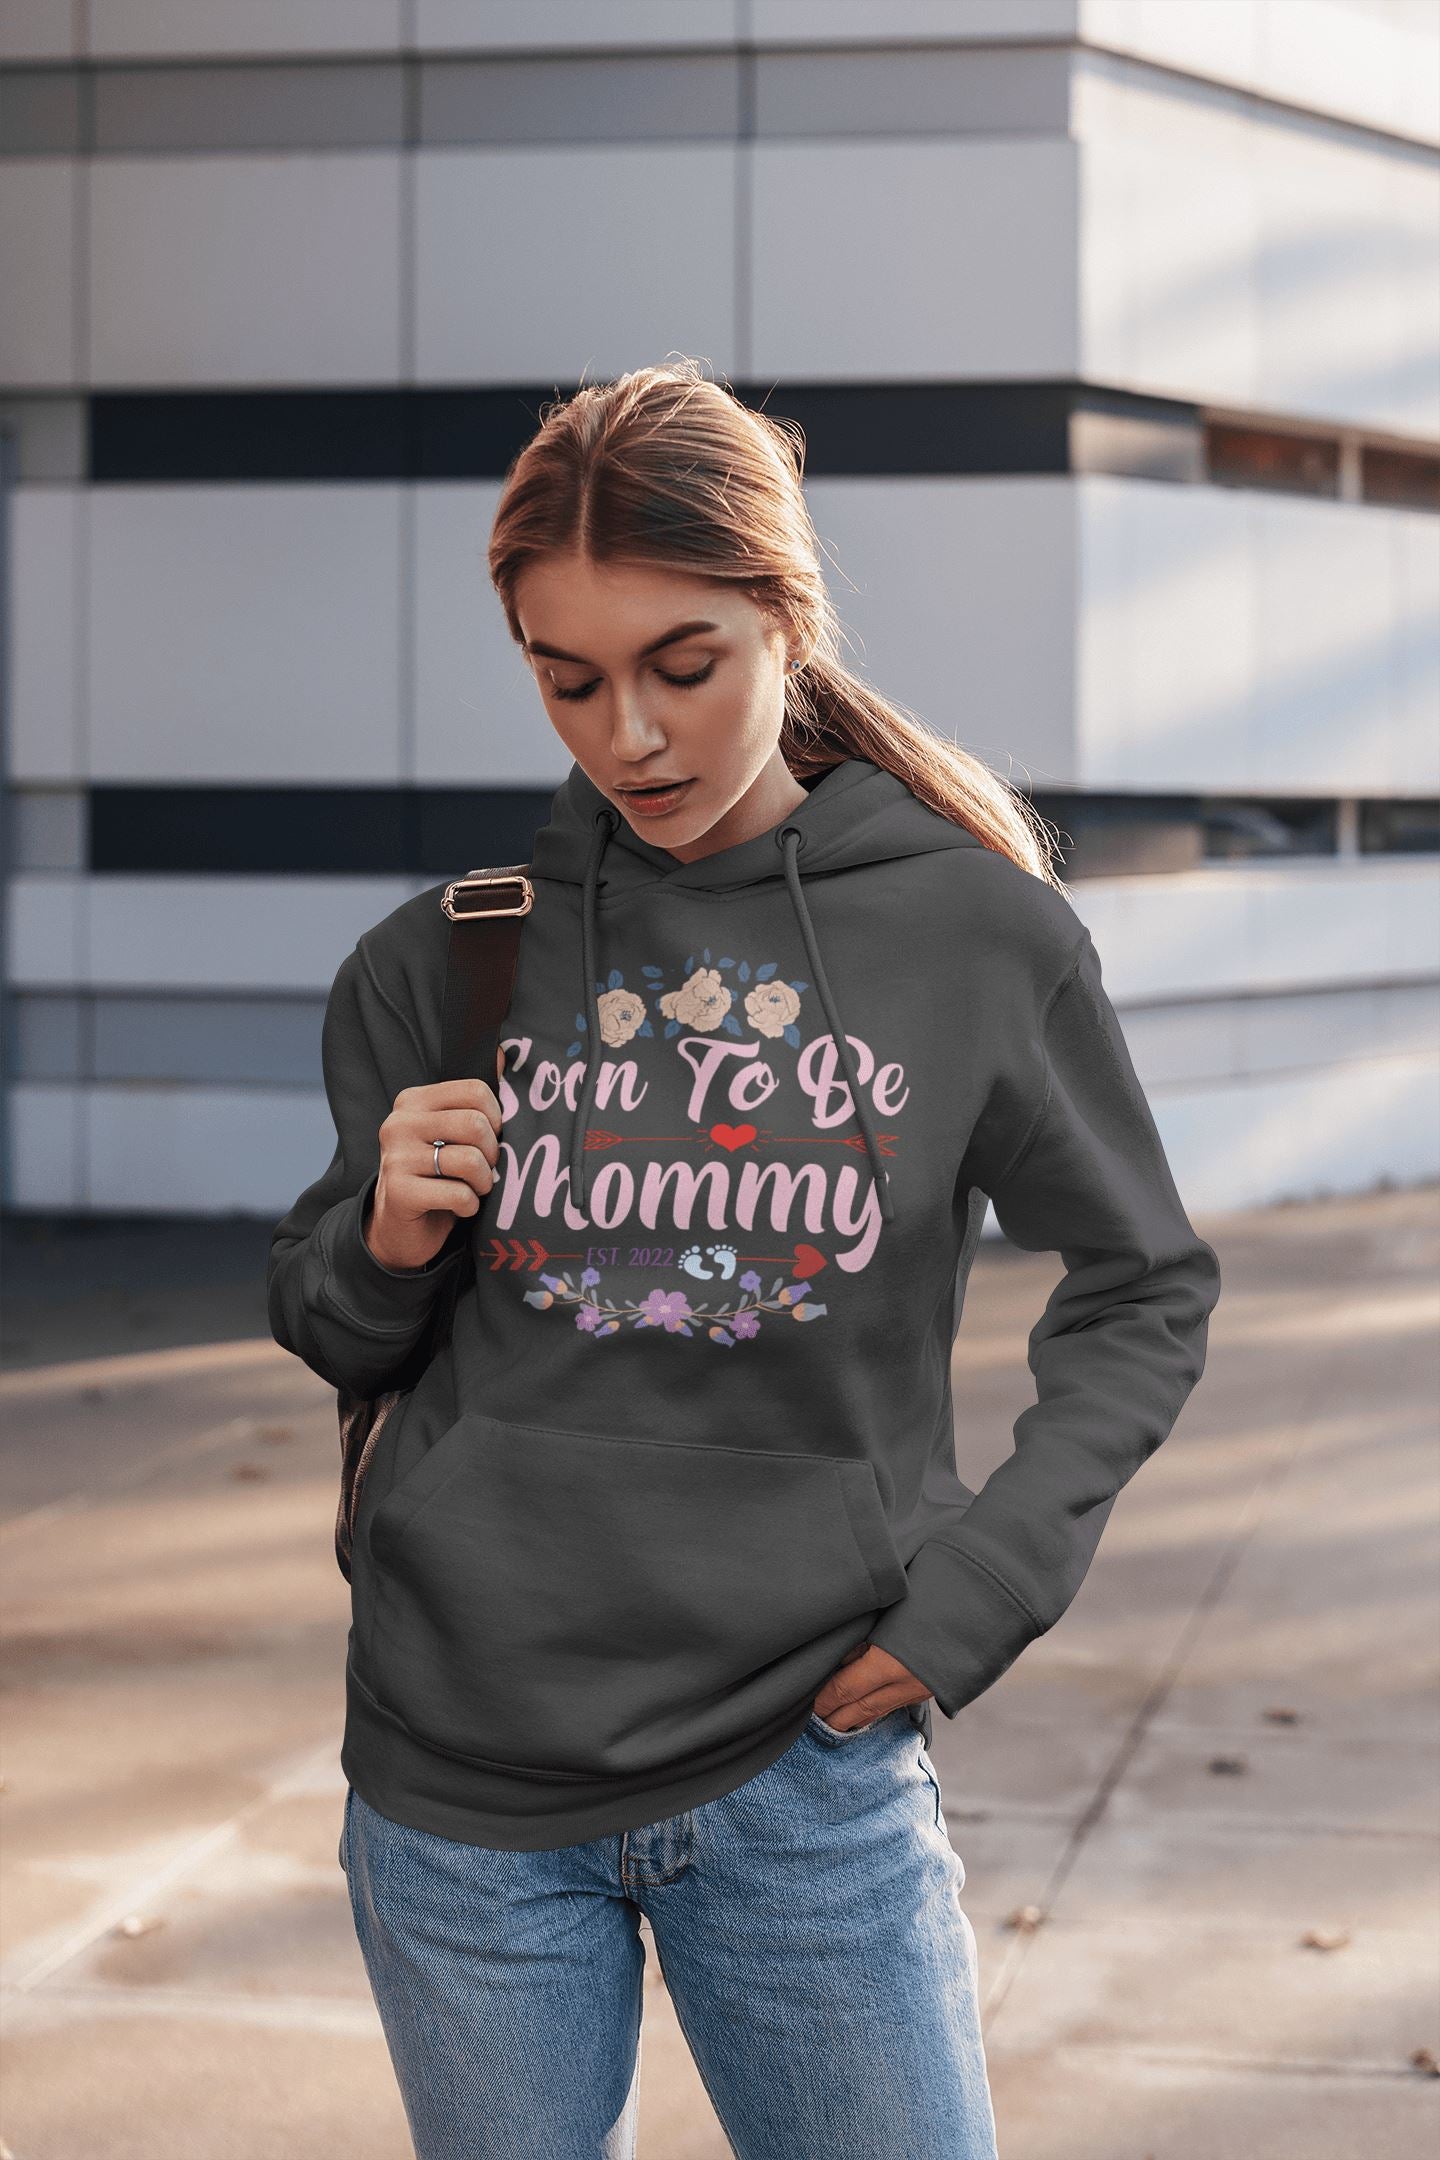 Soon to be Mommy Est. 2022 Special Black Hoodie for Women Printrove 